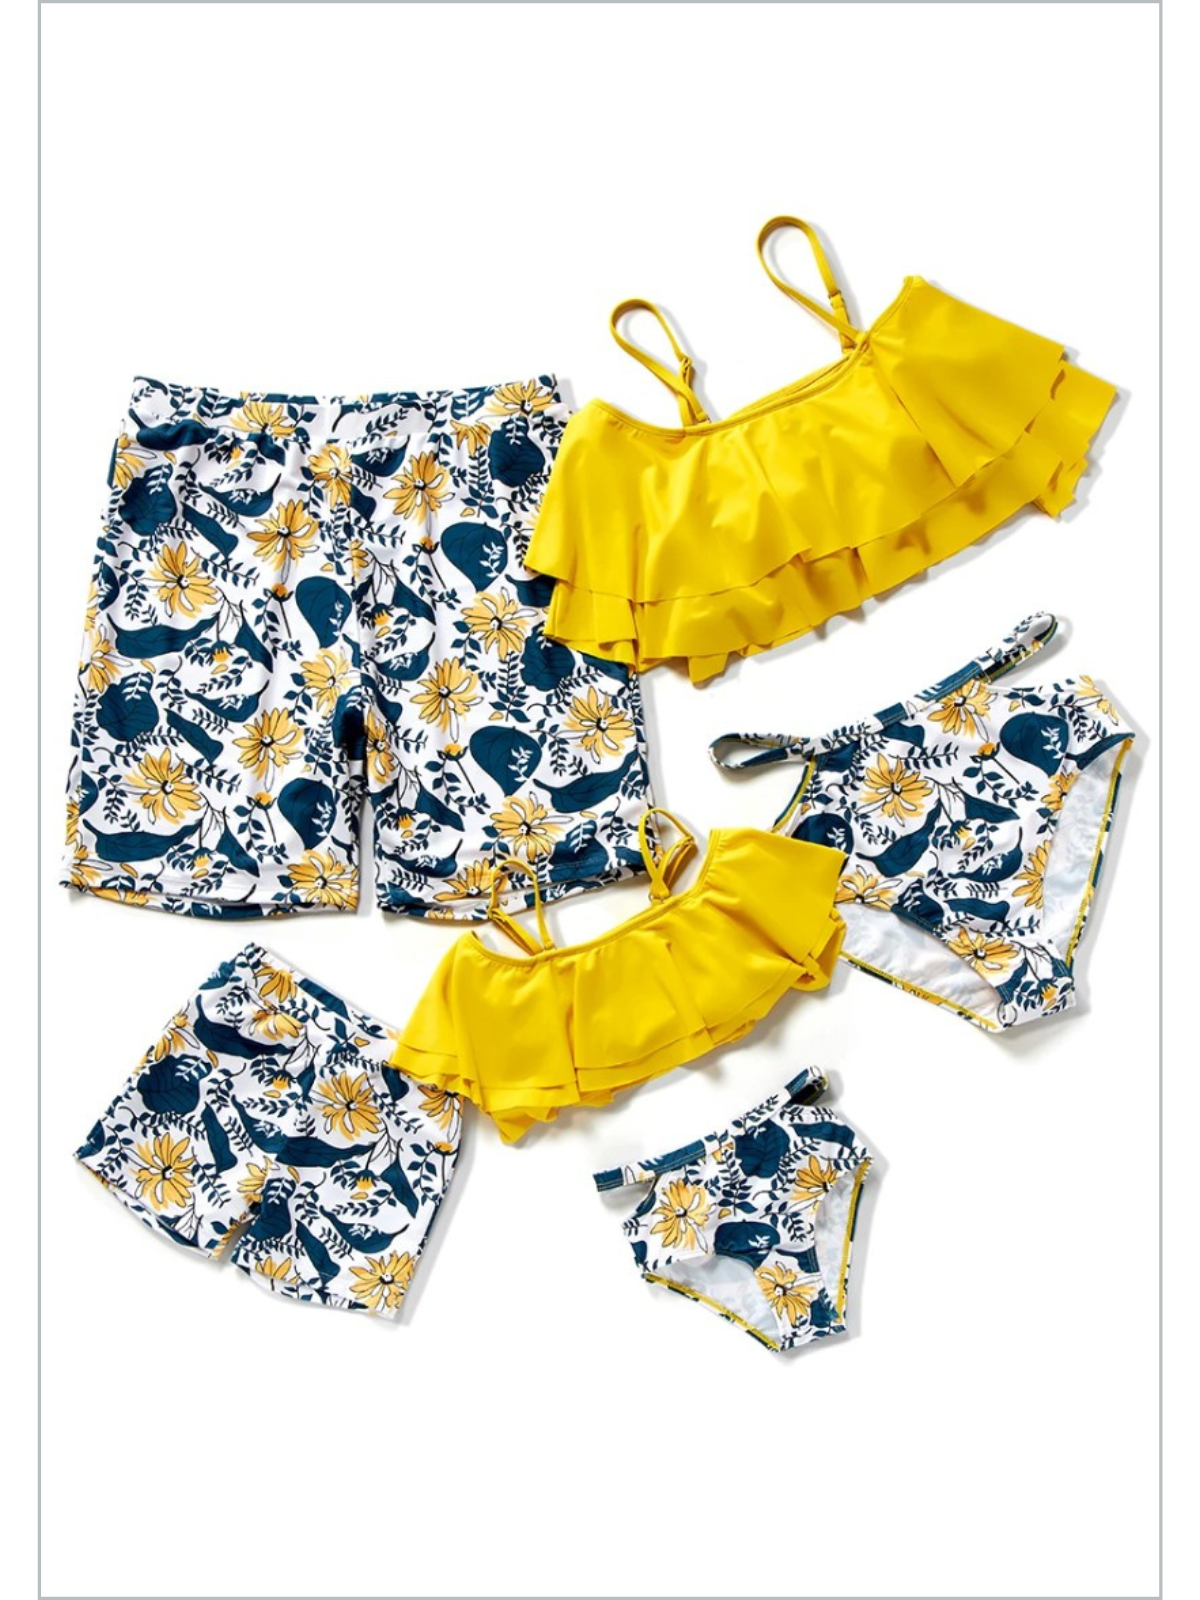 Family Swimsuits | Yellow Floral Tankini & Trunks | Mia Belle Girls